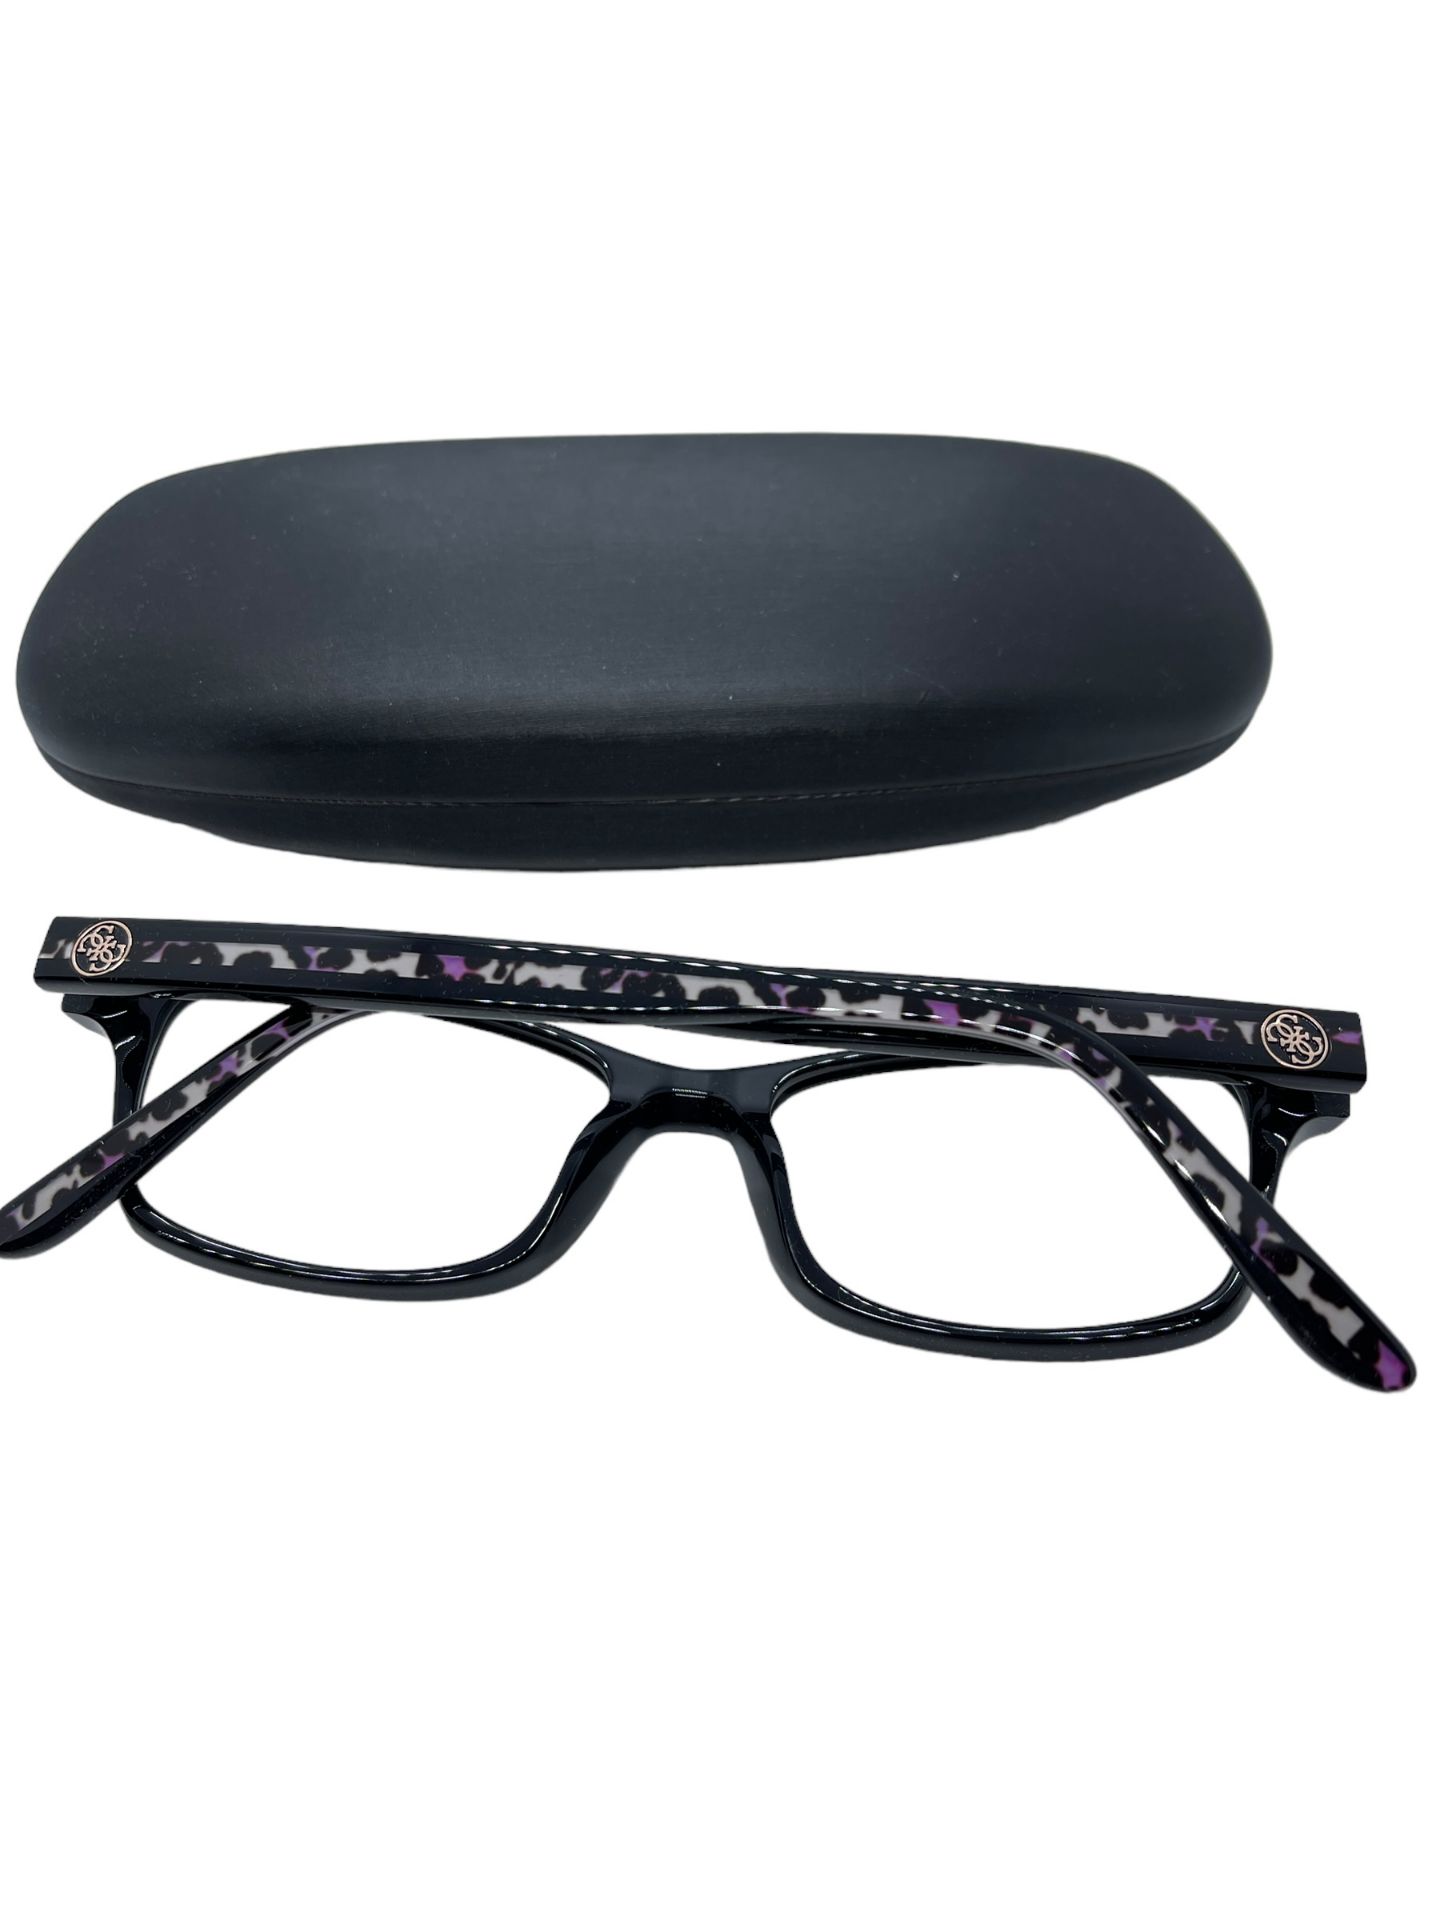 GUESS LADIES SPECTACLES XDEMO - Image 2 of 3